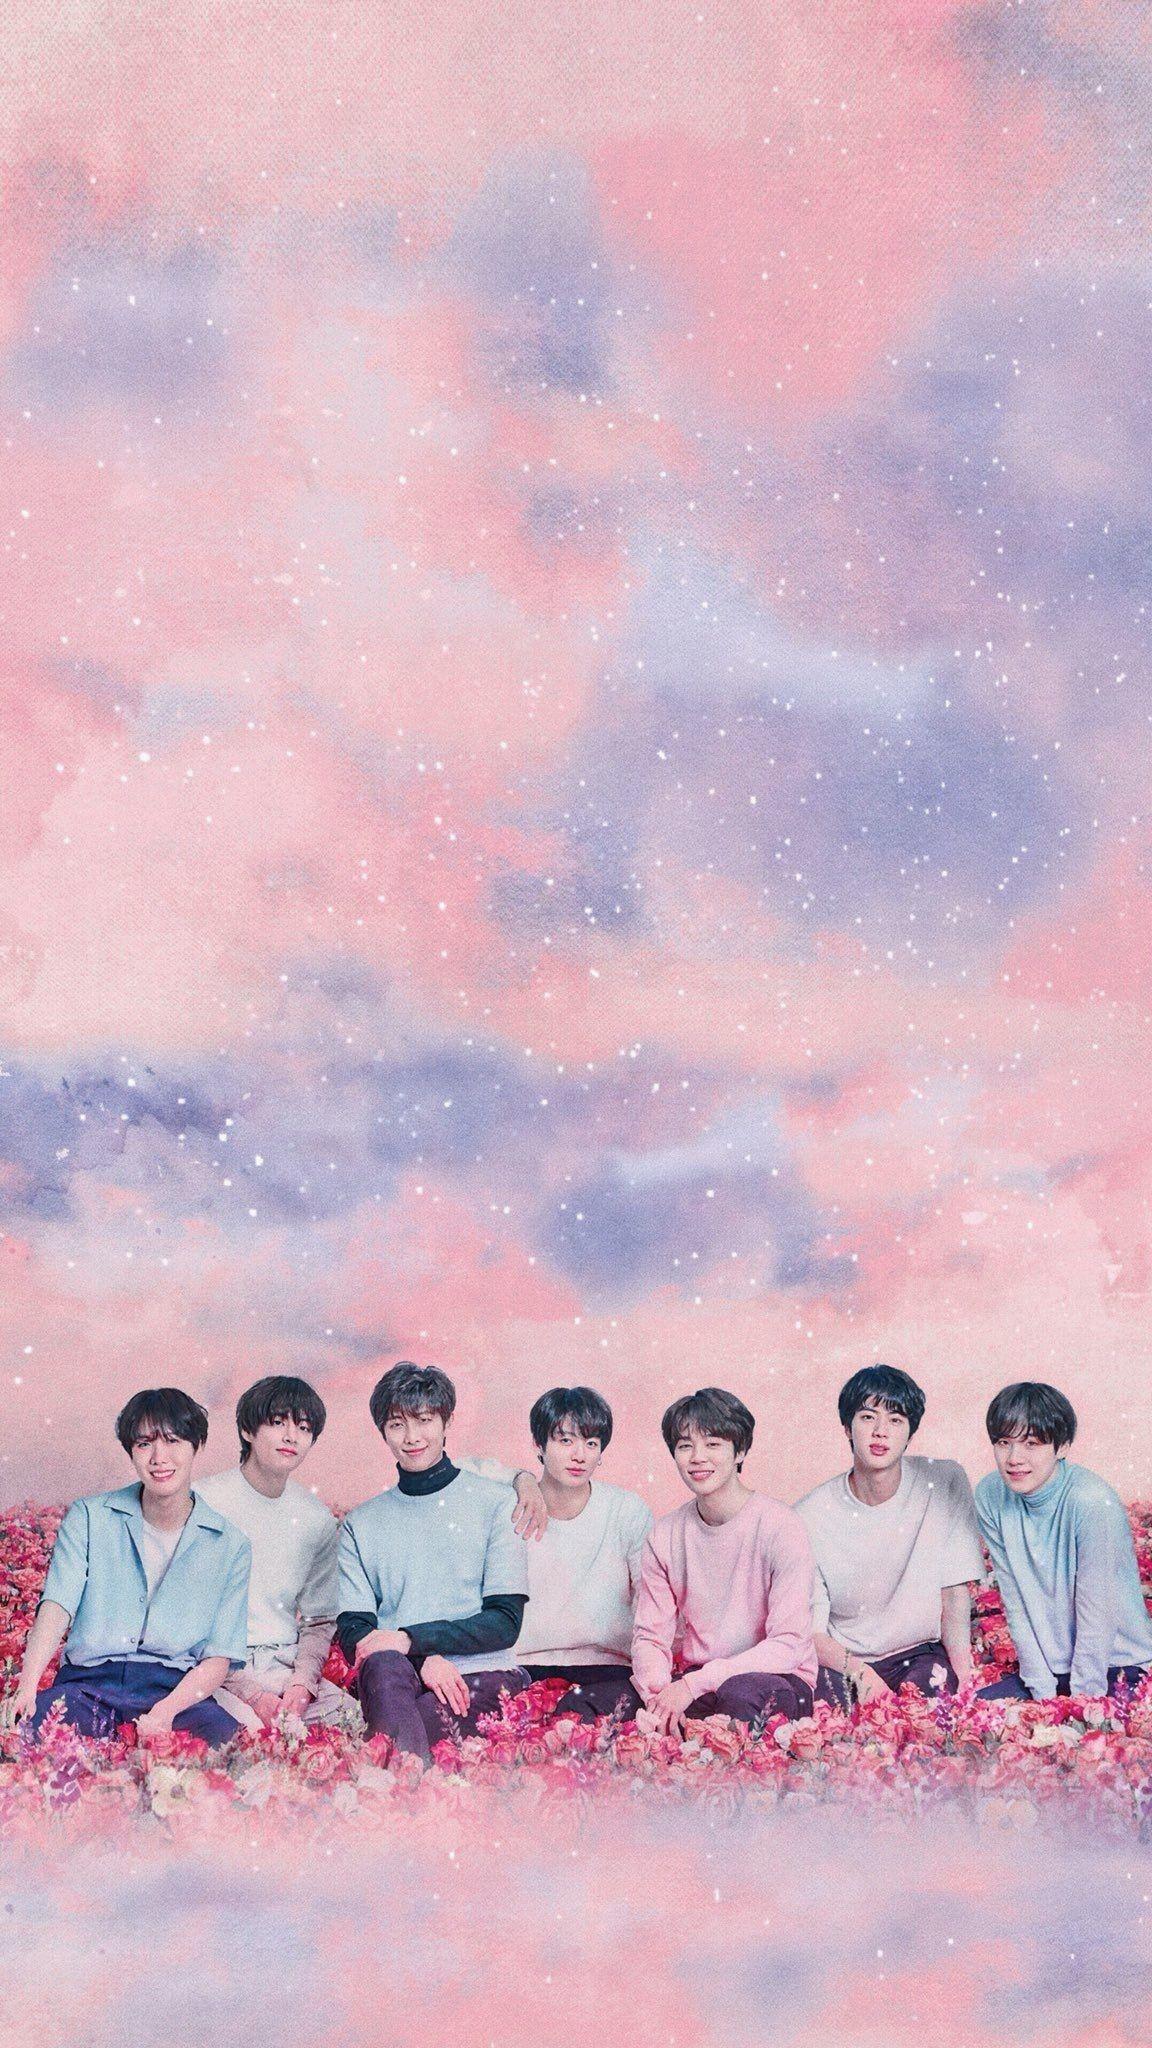  BTS  Army  Wallpapers  Wallpaper  Cave